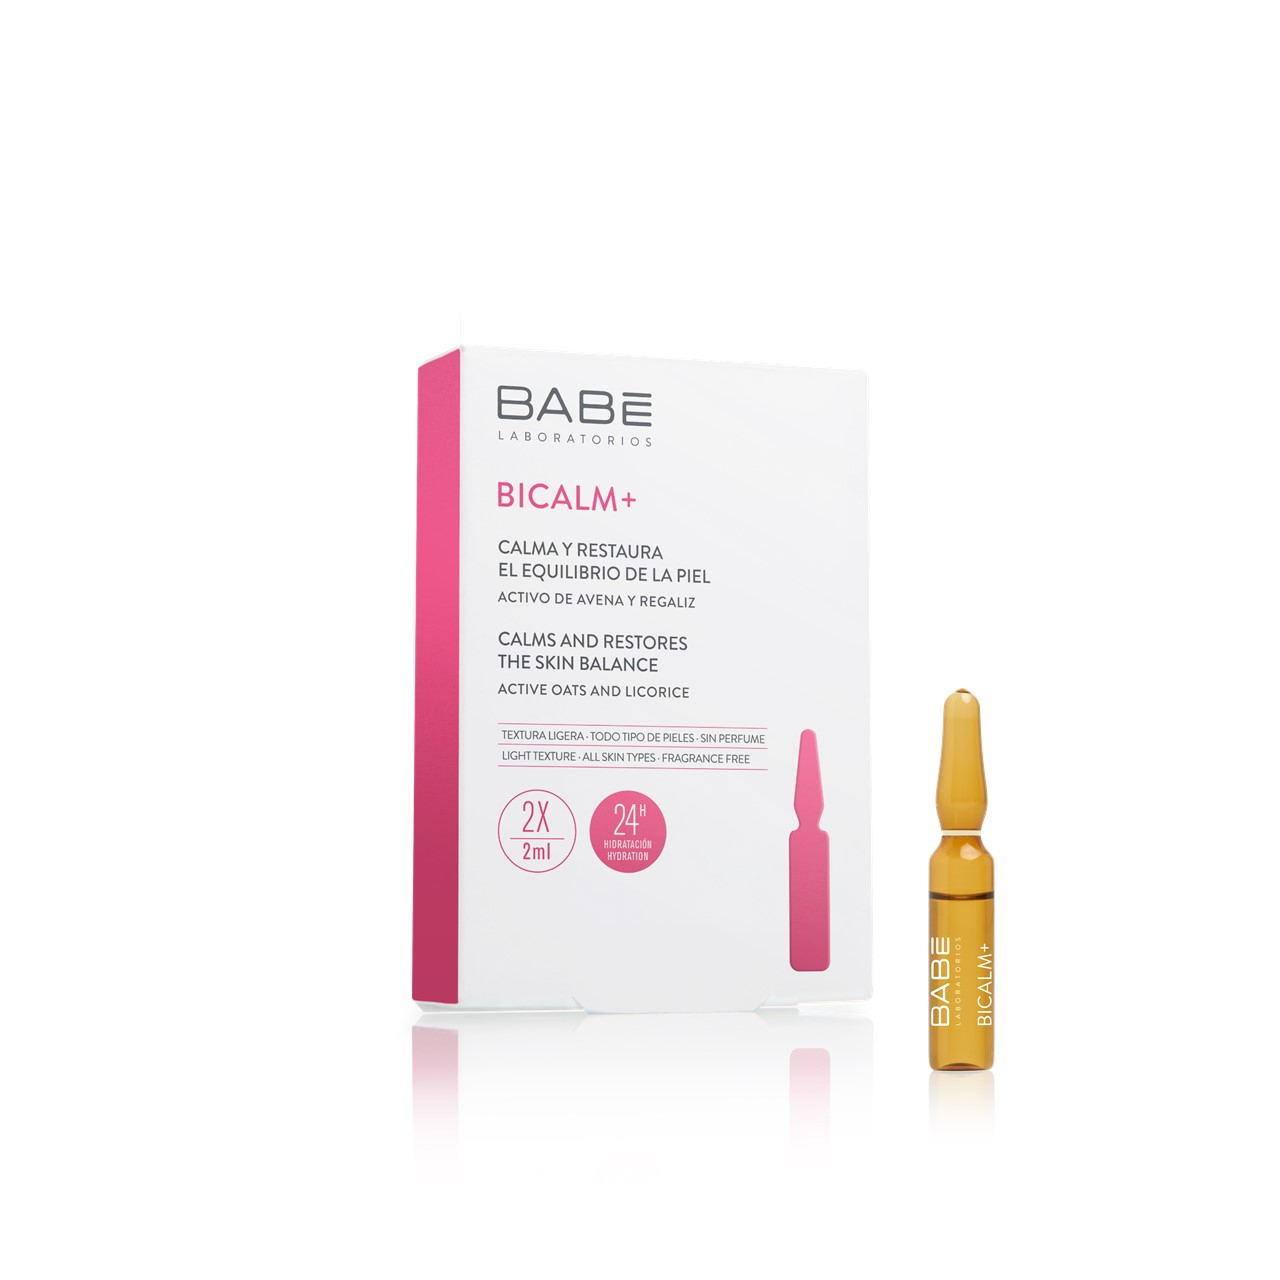 Babé Bicalm+ Soothing & Repairing Ampoules x2